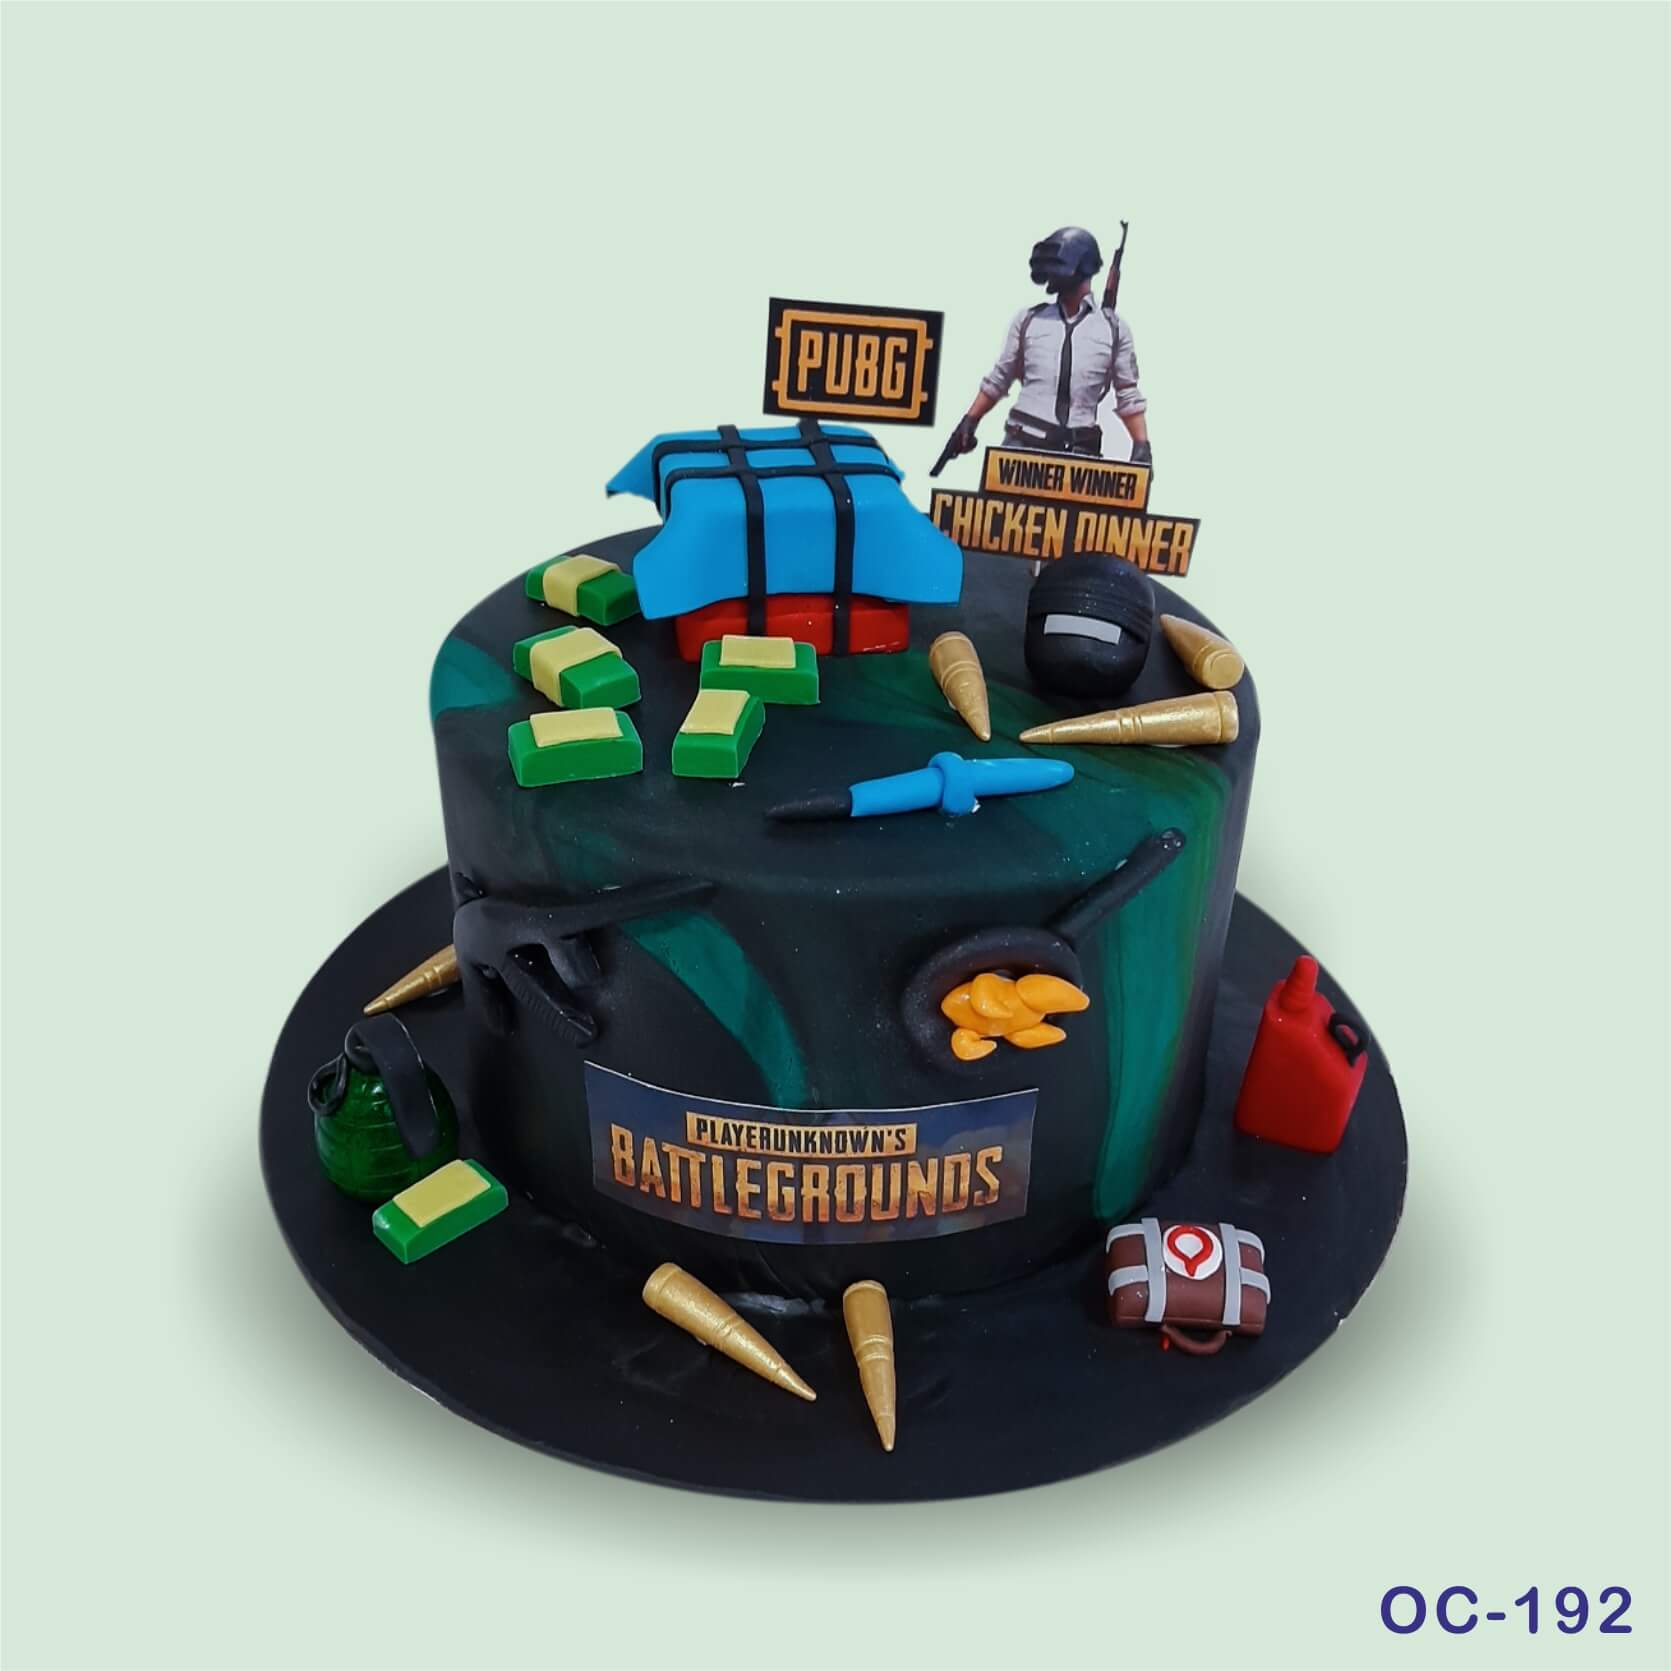 My 21st birthday cake, PUBG-style! Just thought it would be cute to share.  : r/PUBGMobile